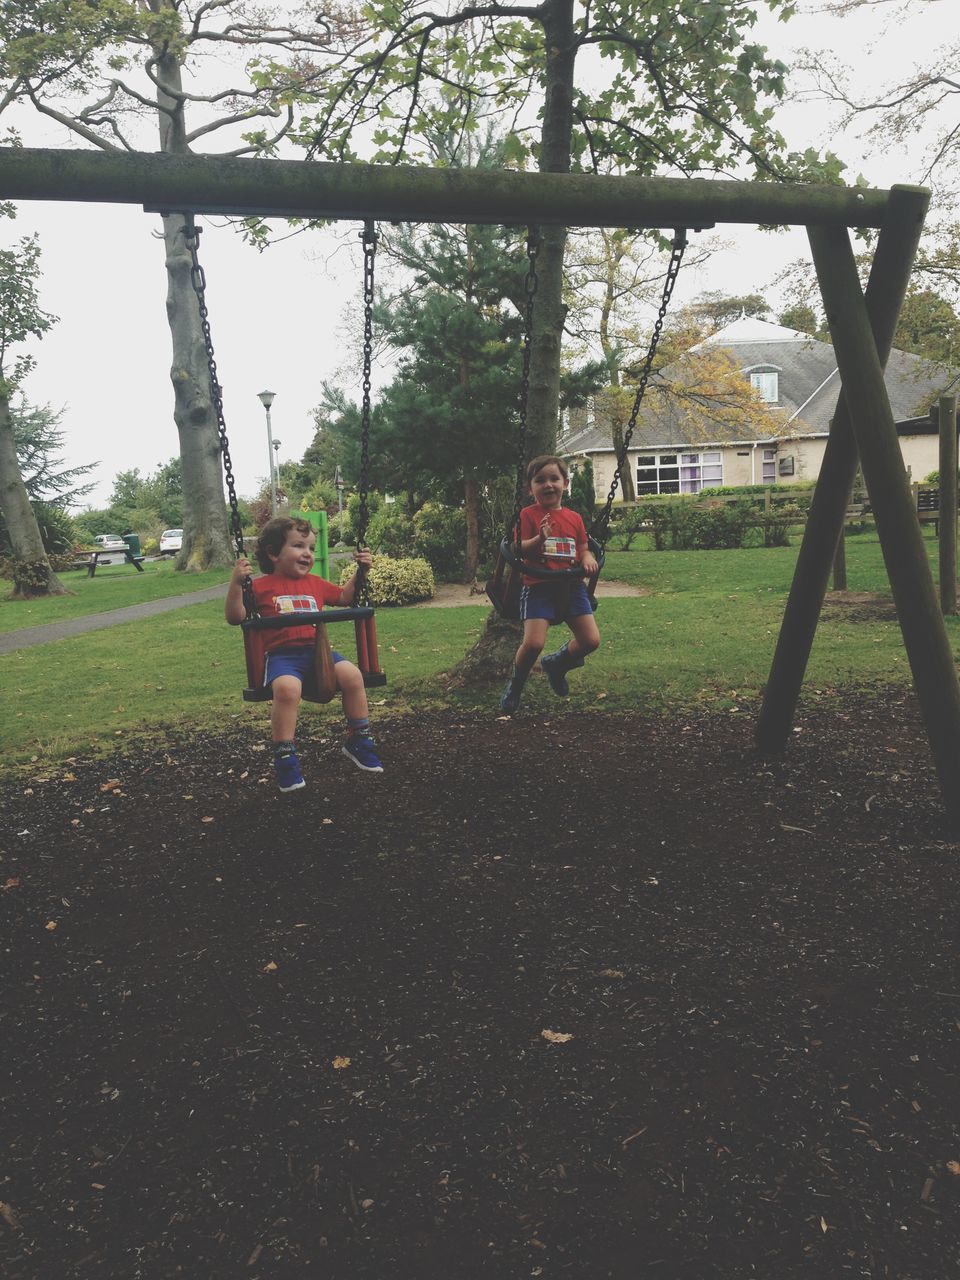 tree, grass, lifestyles, leisure activity, childhood, park - man made space, playground, field, full length, park, day, lawn, swing, playing, men, casual clothing, grassy, sitting